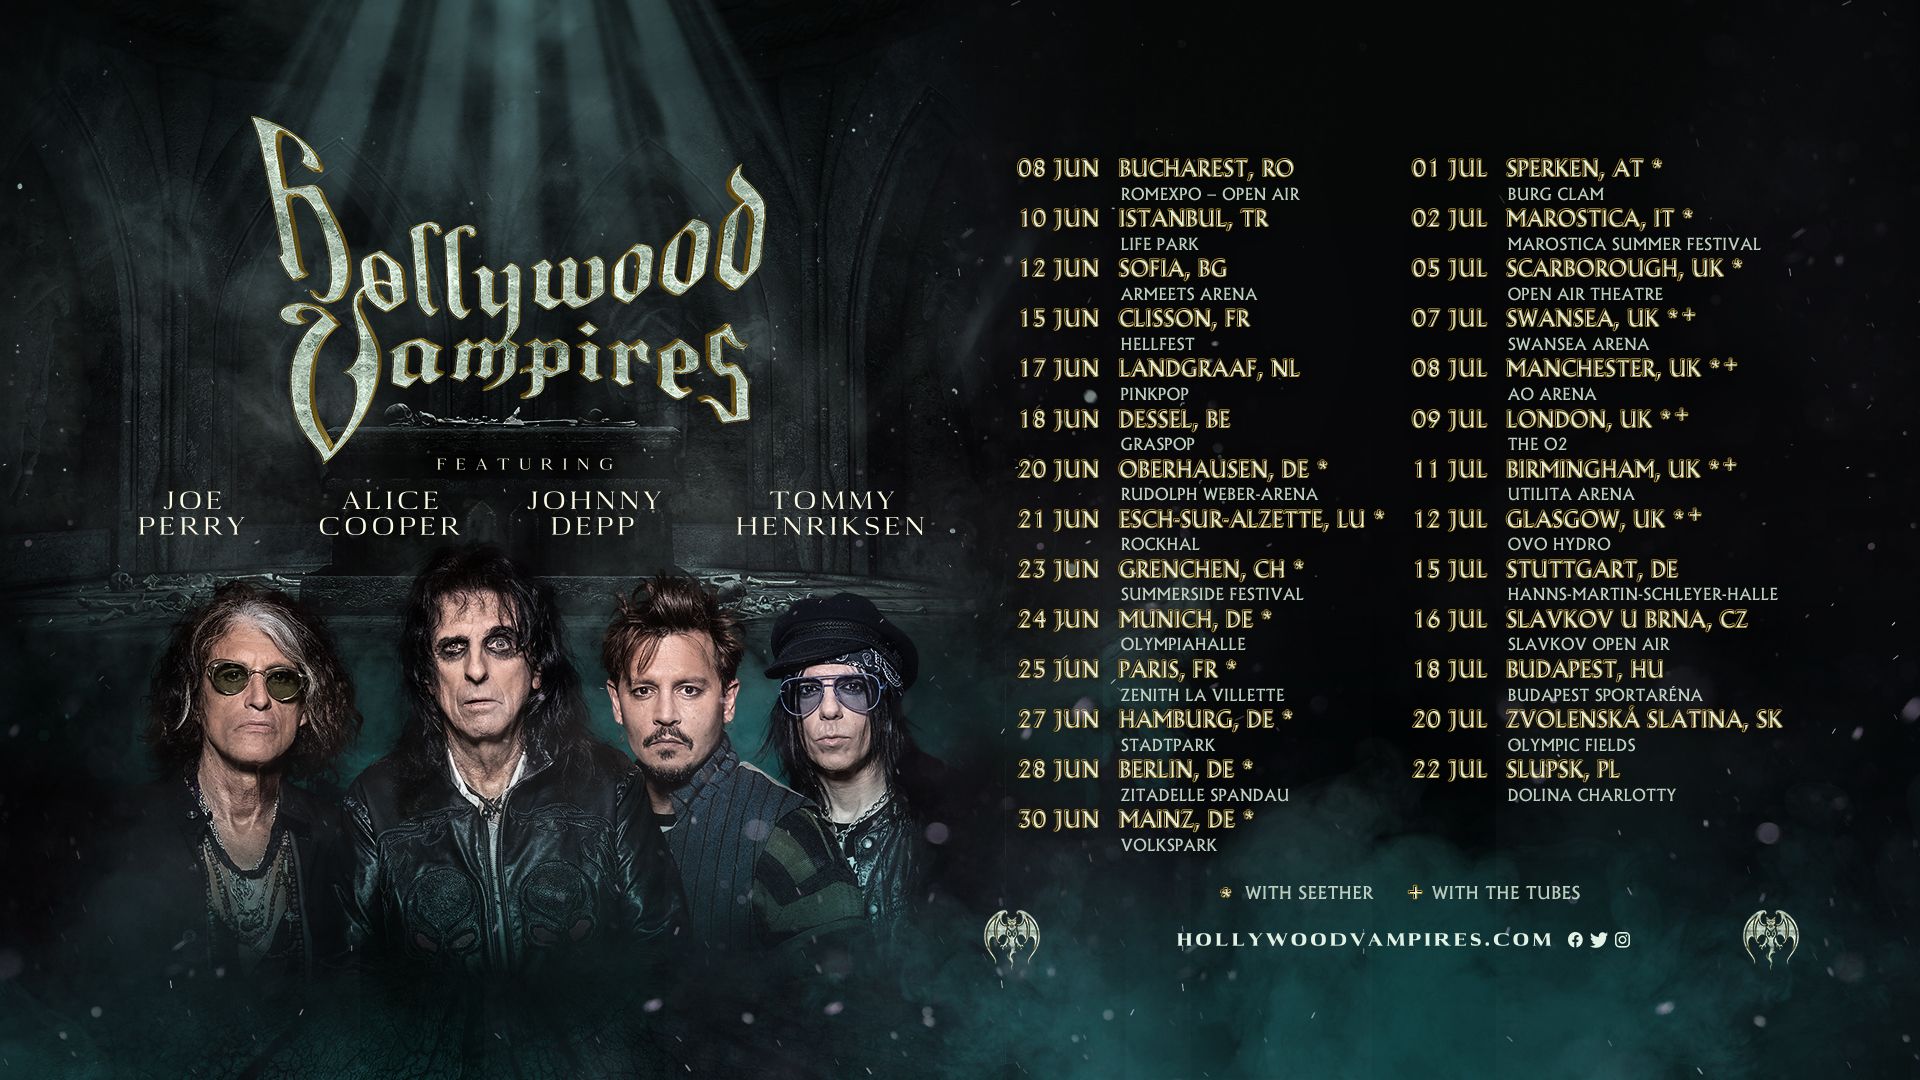 hollywood vampires tour 2023 manchester